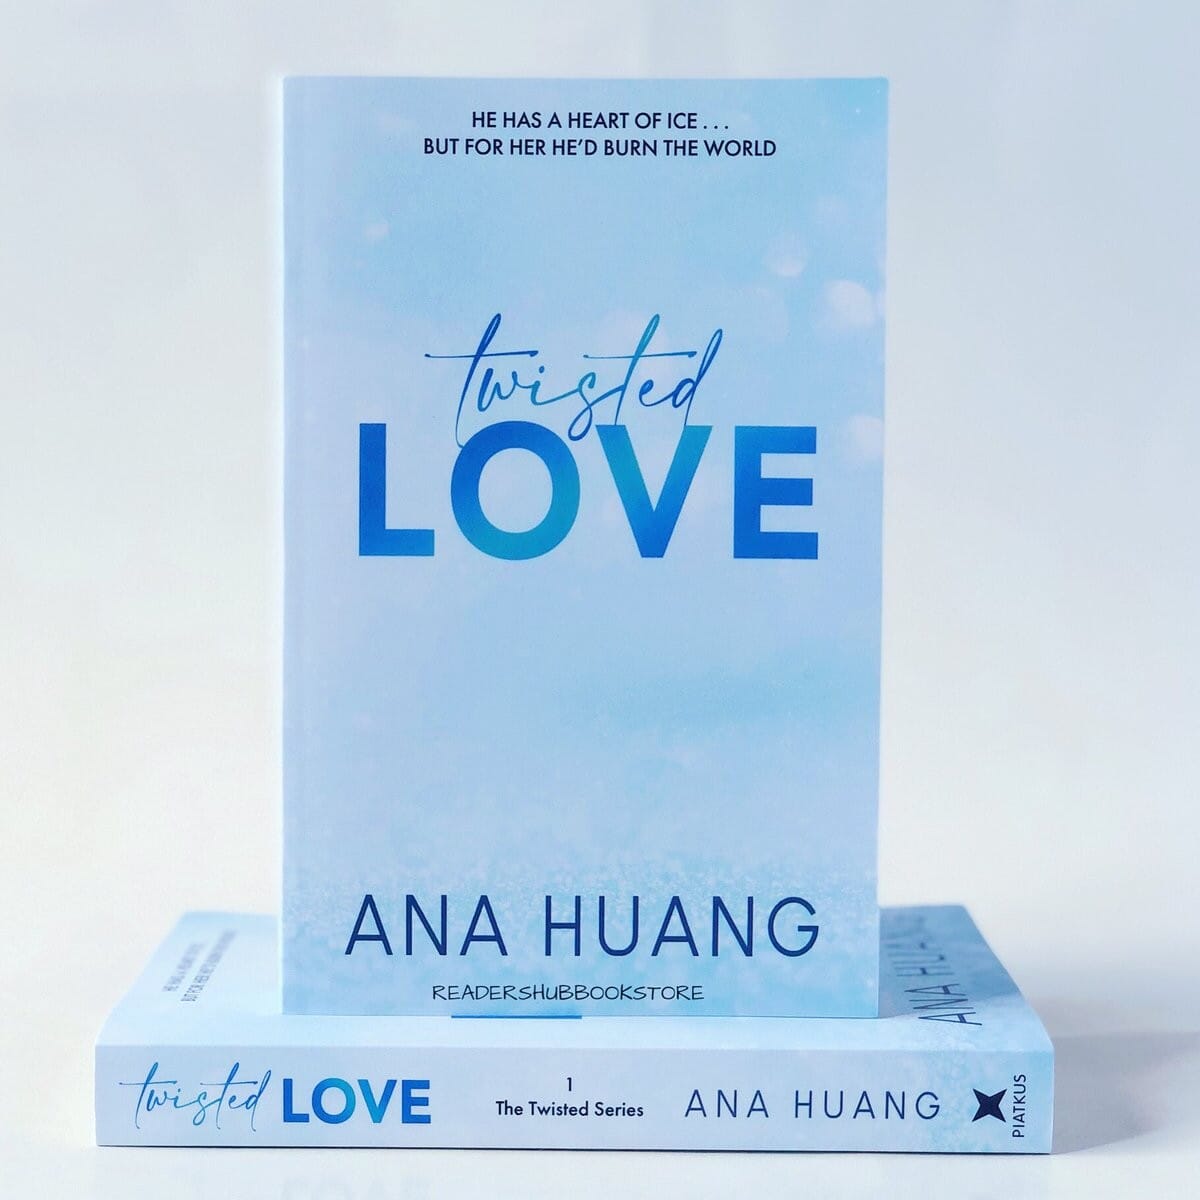 Twisted Love Book by Ana Huang